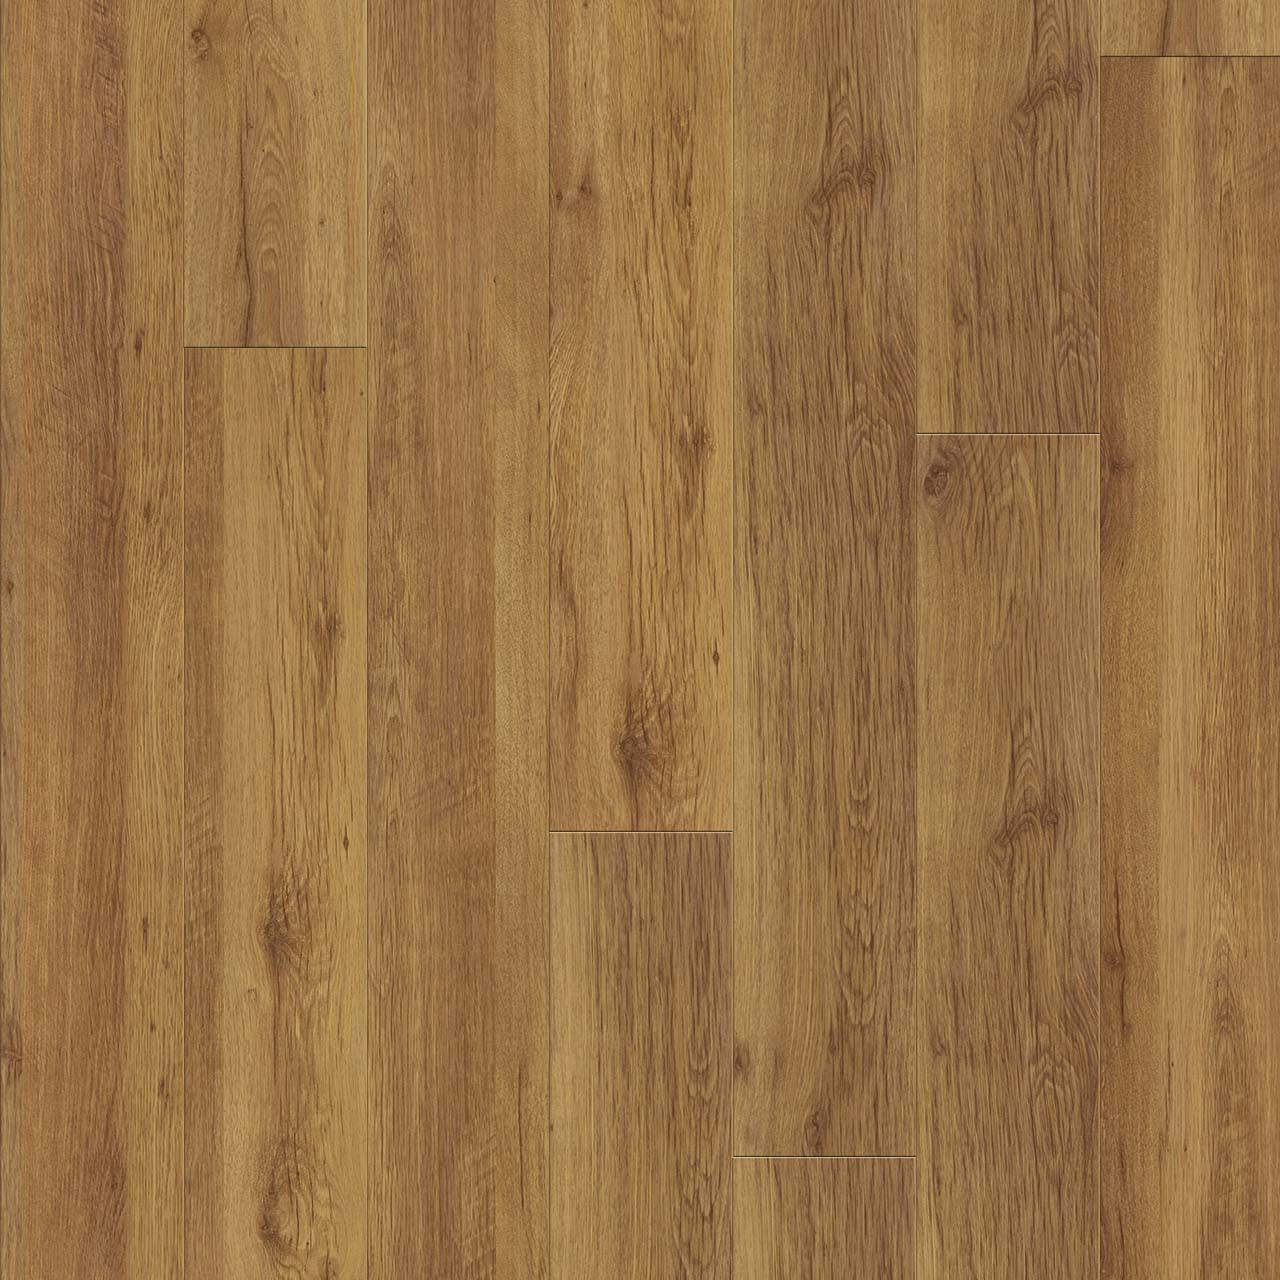 Engineered Floors - Wood Tech Collection - 7 in. x 54 in. - Hemlock Trail